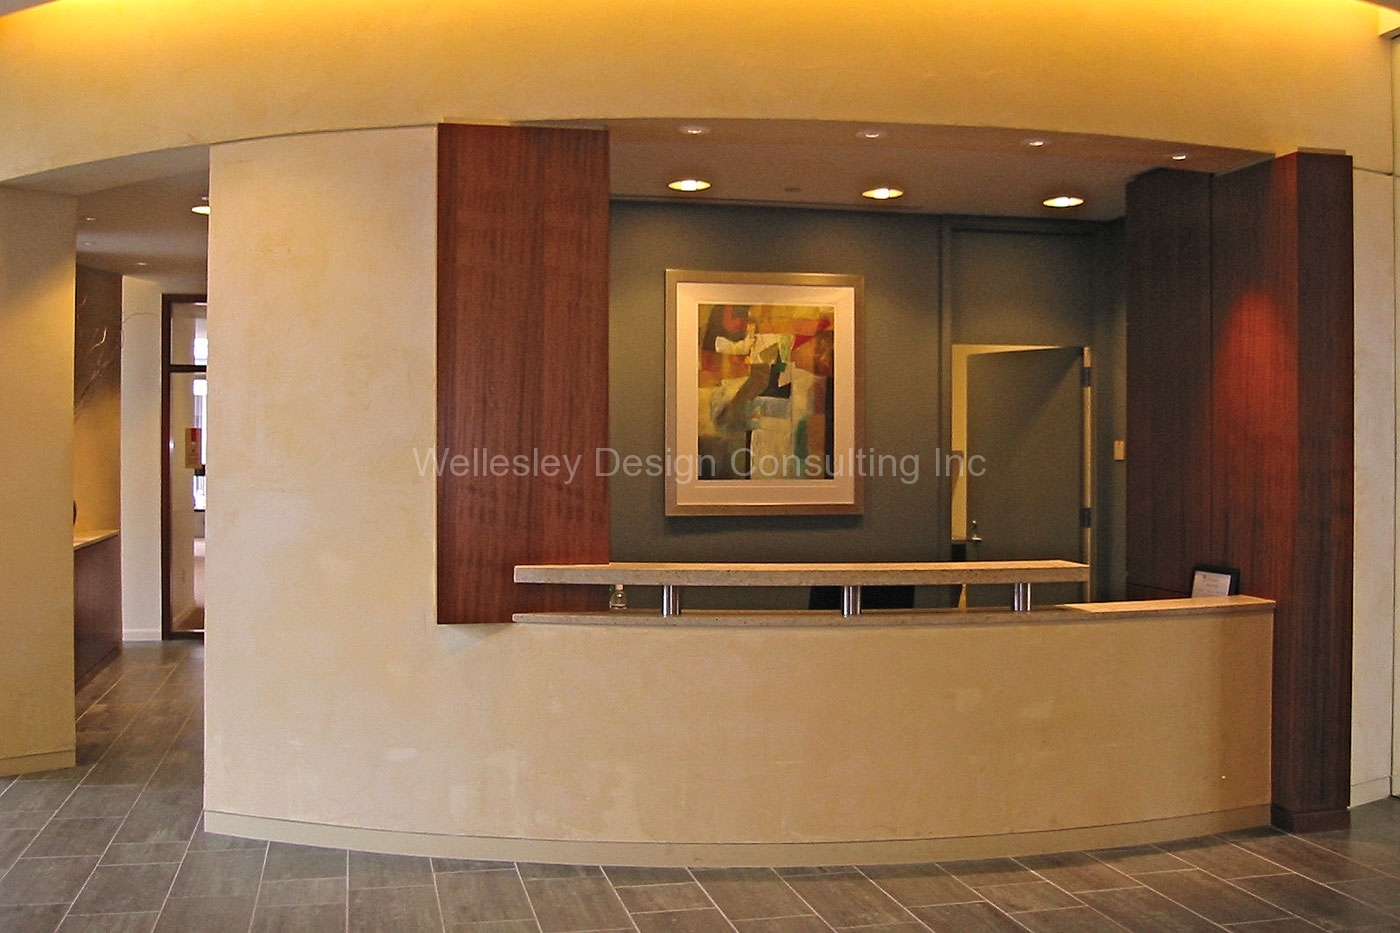 Common area designed by Wellesley Design Consulting